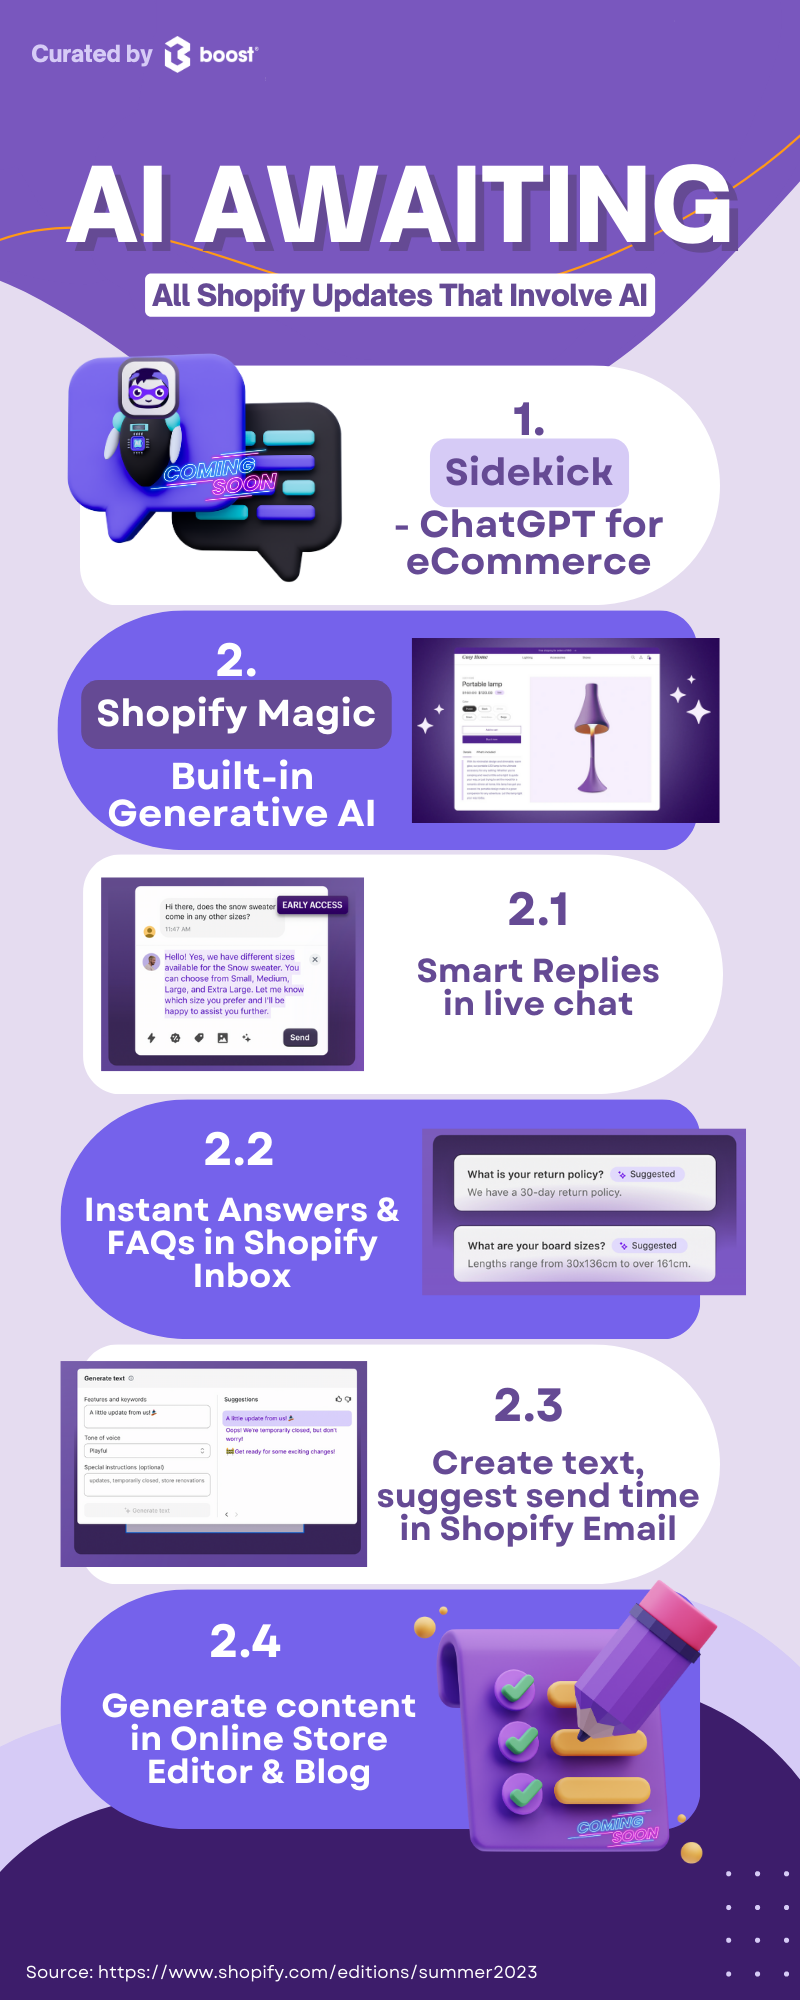 shopify editions | shopify magic | shopify sidekick ai enabled assistant for ecommerce merchants